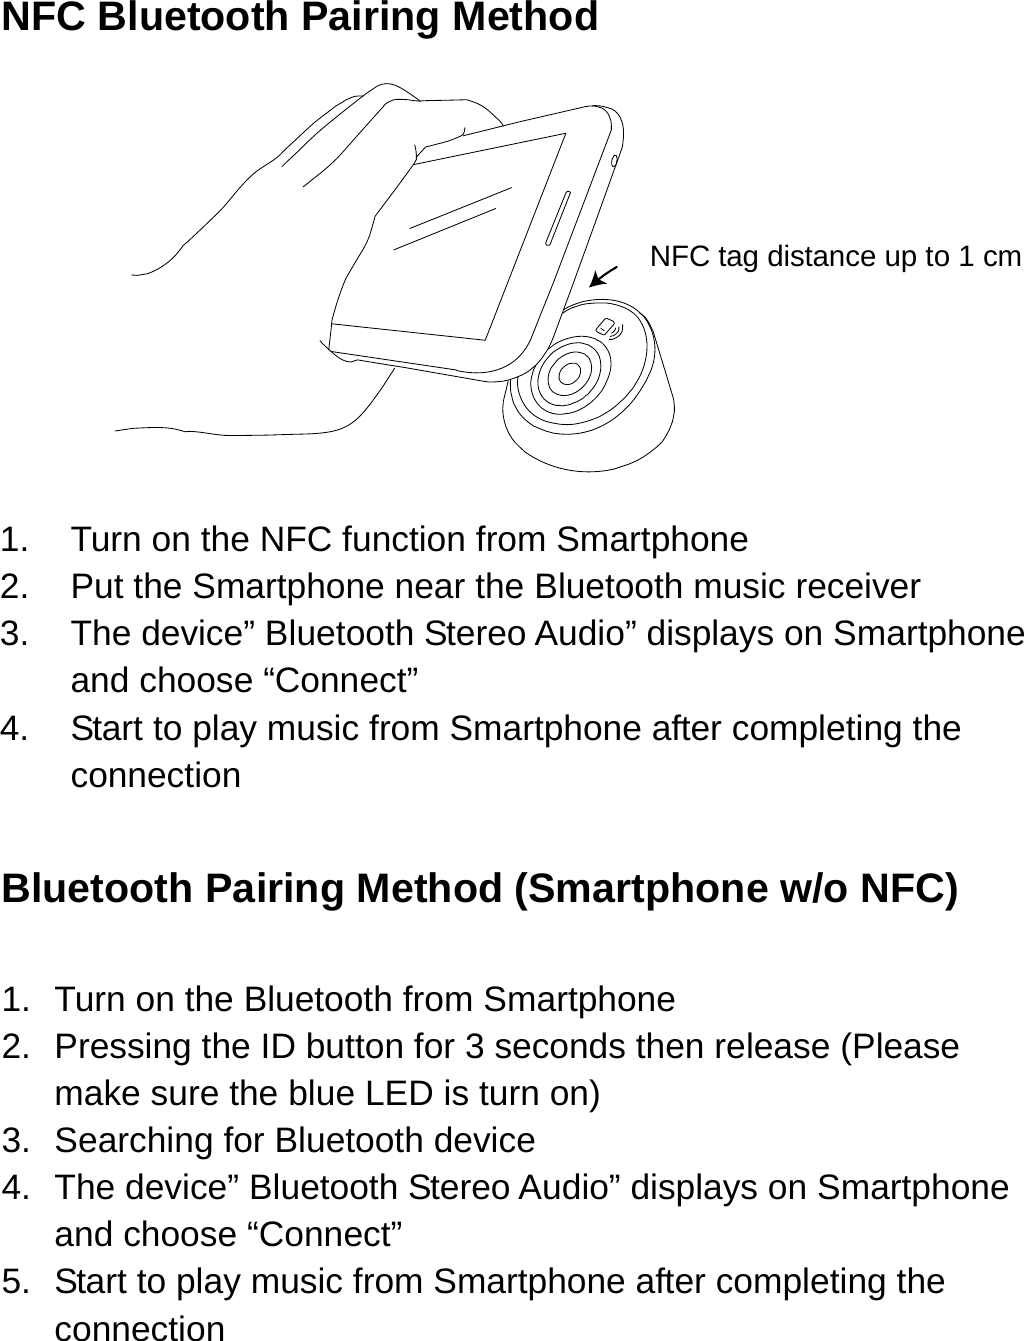 NFC Bluetooth Pairing Method                                                NFC tag distance up to 1 cm     1.  Turn on the NFC function from Smartphone   2.  Put the Smartphone near the Bluetooth music receiver   3.  The device” Bluetooth Stereo Audio” displays on Smartphone and choose “Connect” 4.  Start to play music from Smartphone after completing the connection  Bluetooth Pairing Method (Smartphone w/o NFC)  1.  Turn on the Bluetooth from Smartphone   2.  Pressing the ID button for 3 seconds then release (Please make sure the blue LED is turn on) 3.  Searching for Bluetooth device 4. The device” Bluetooth Stereo Audio” displays on Smartphone and choose “Connect” 5.  Start to play music from Smartphone after completing the connection   